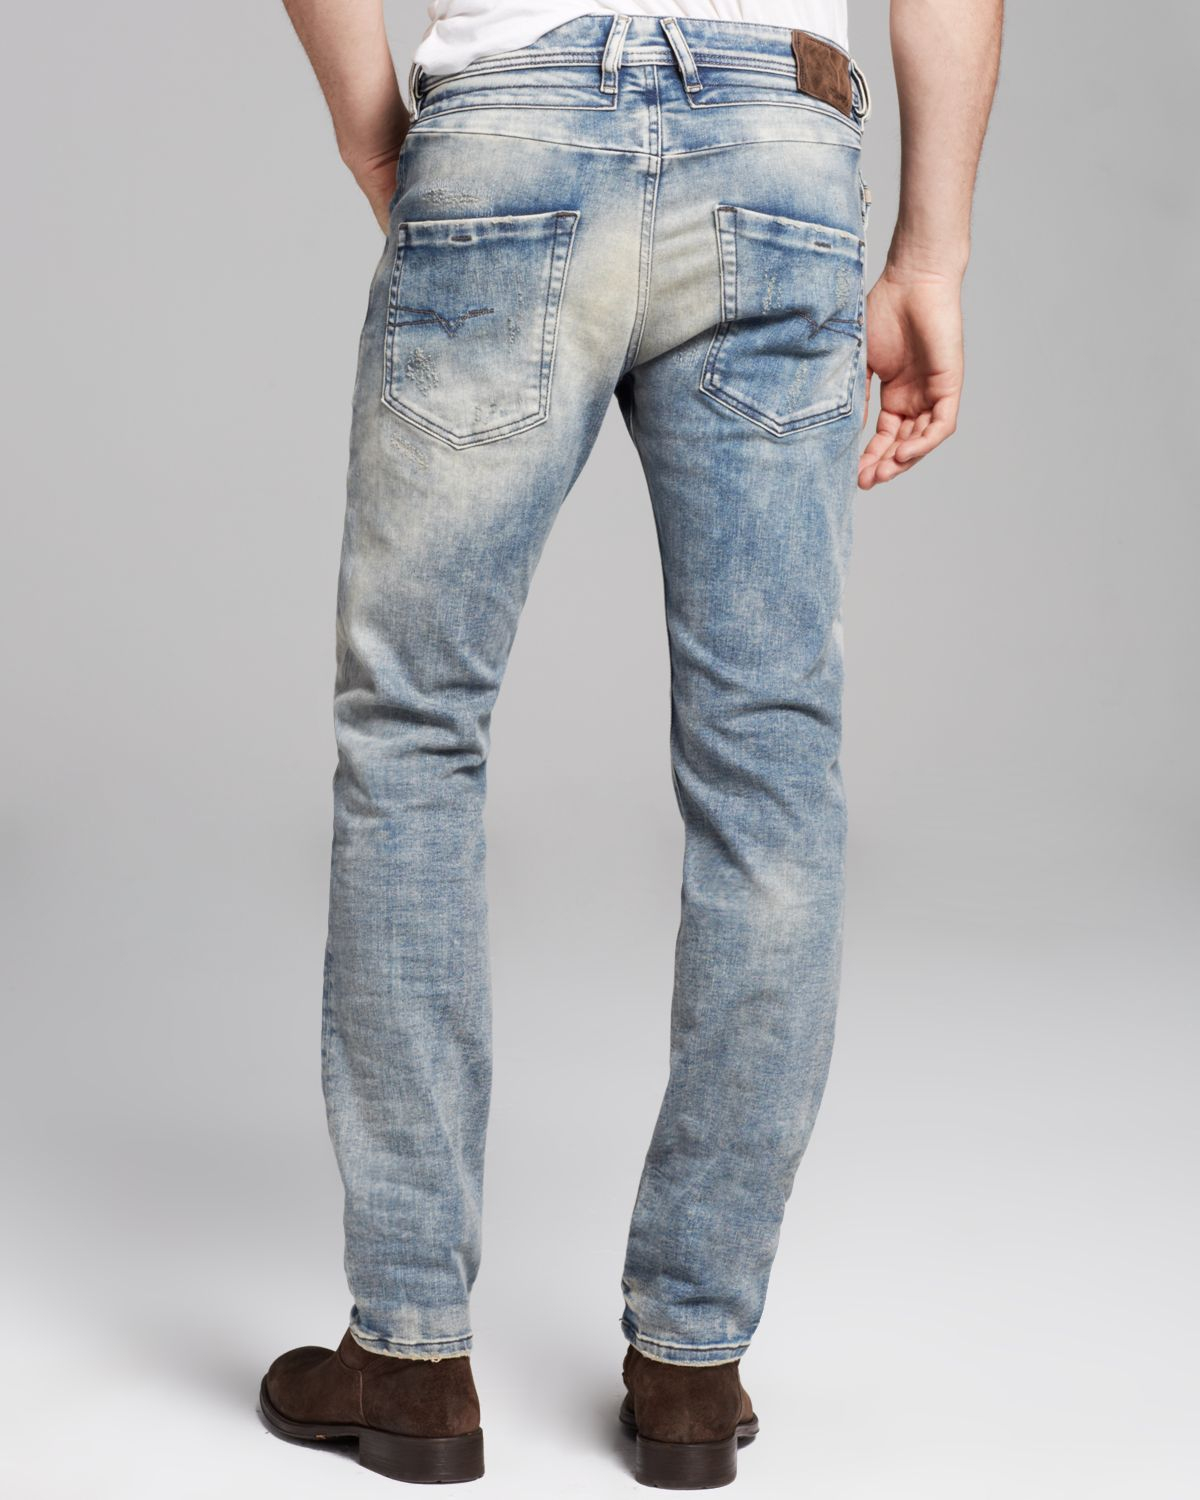 DIESEL Jeans Belther Slim Fit in Ghostface in Blue for Men - Lyst